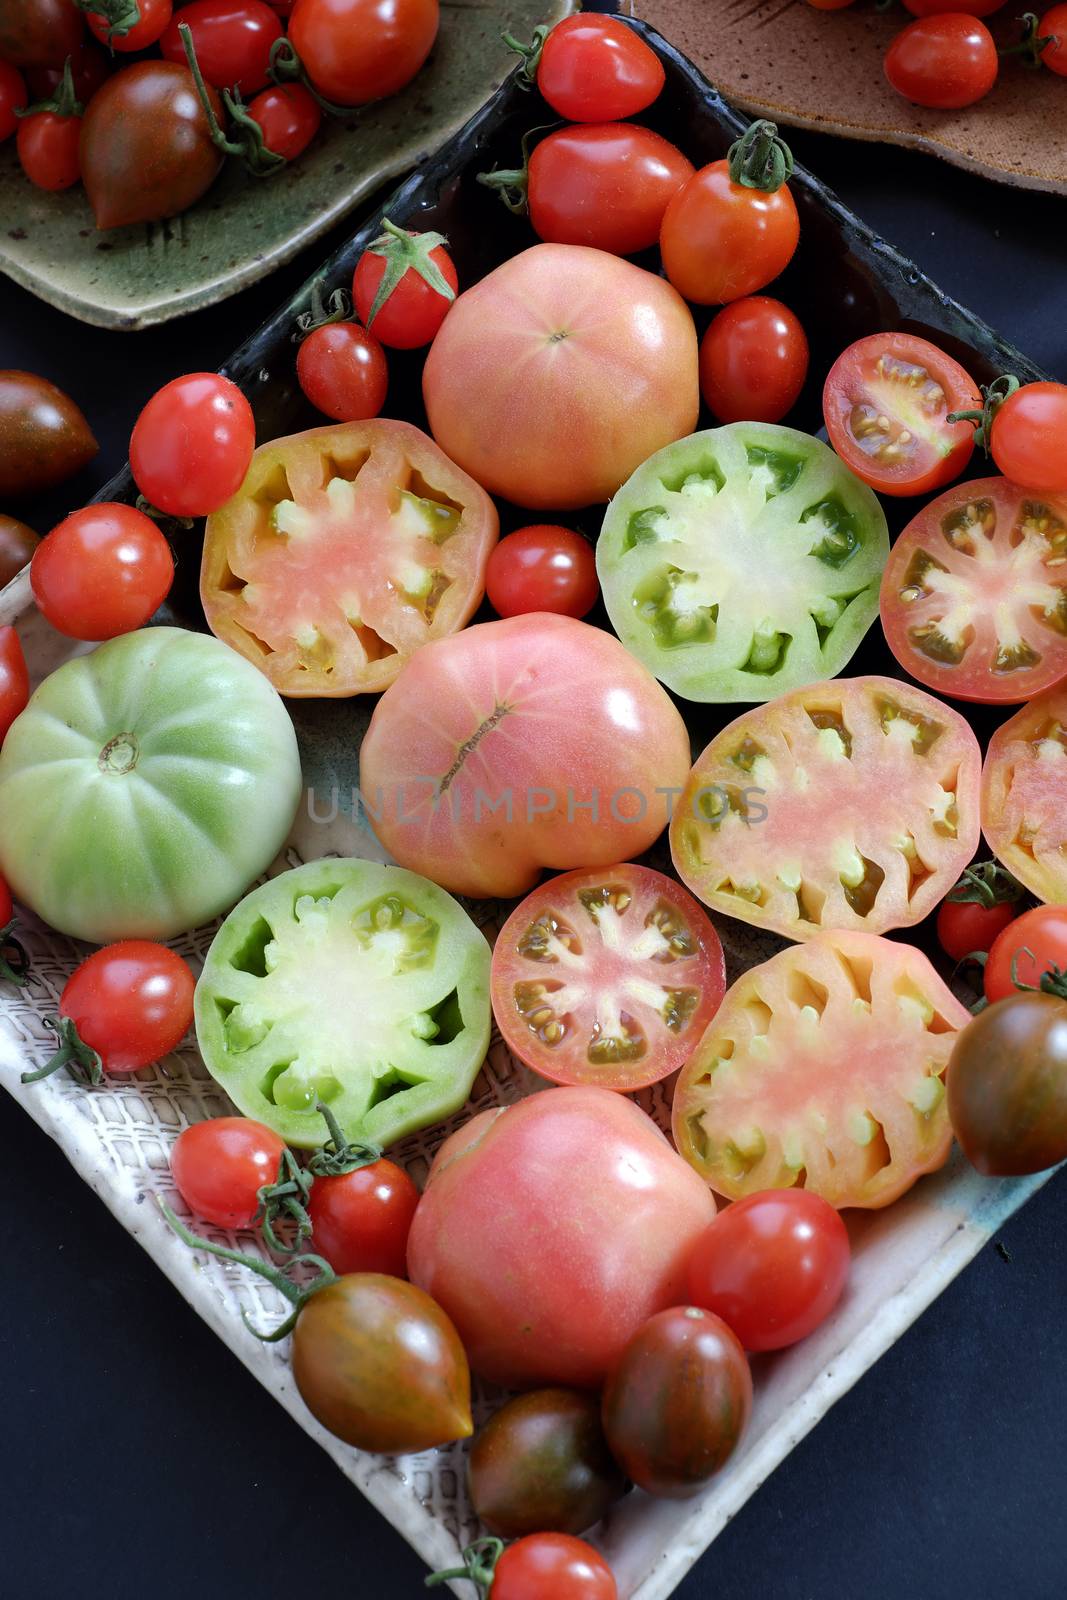 Collect of tomatoes, a popular and cheap food with many uses as antioxidants, skin care, anticancer, good for alzheimer people, this vegetable rich vitamin a, vitamin c, fiber, carotenoids, lycopene